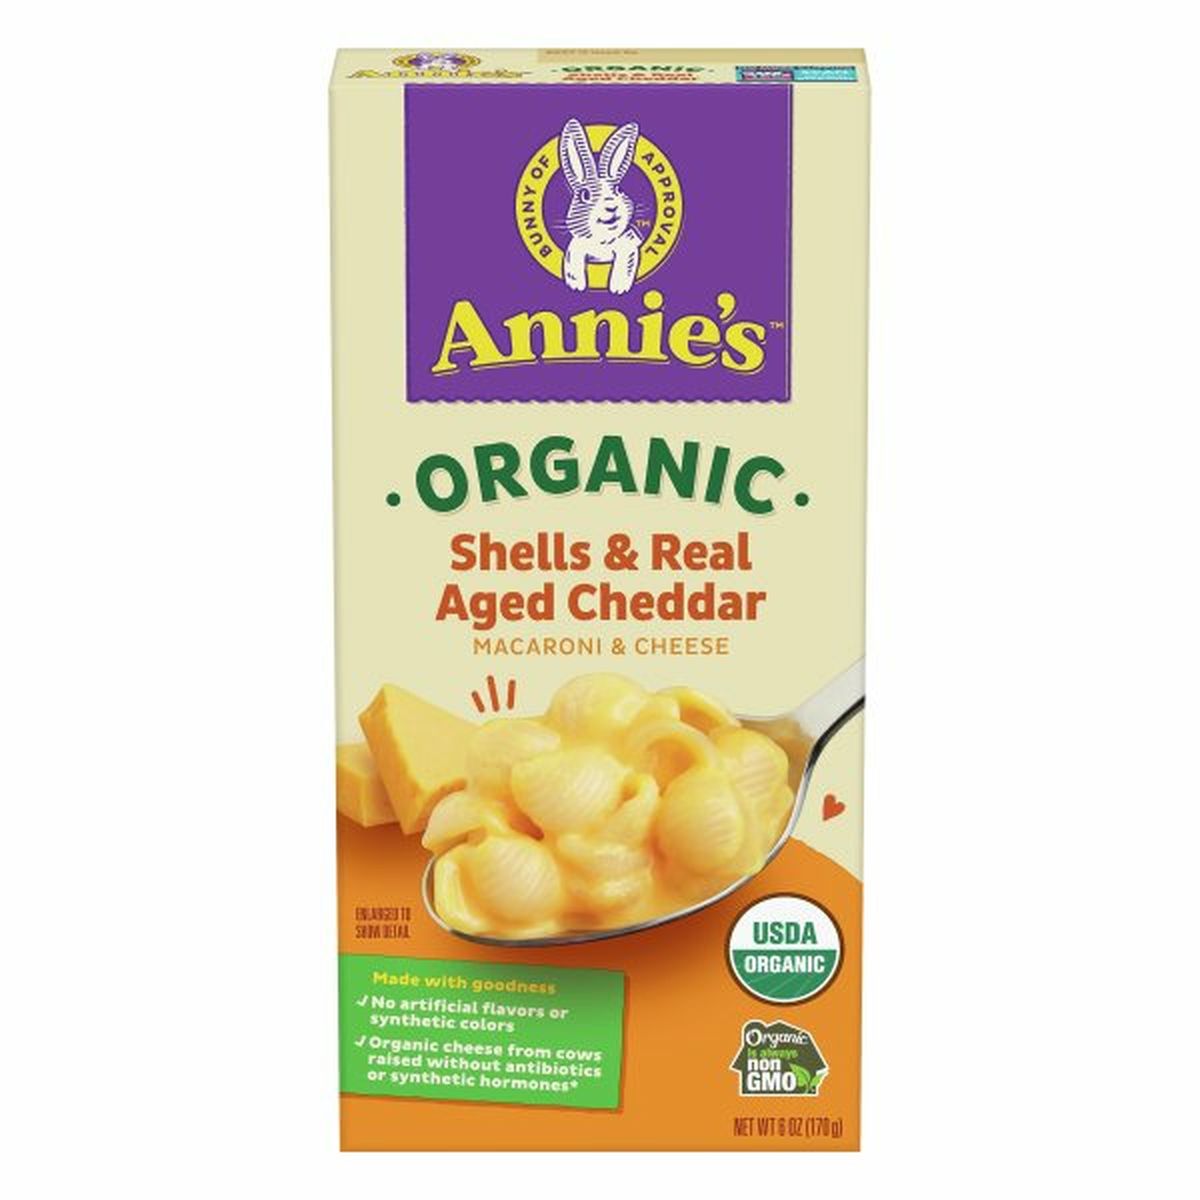 Calories in Annie's Macaroni & Cheese, Organic, Shells & Real Aged Cheddar